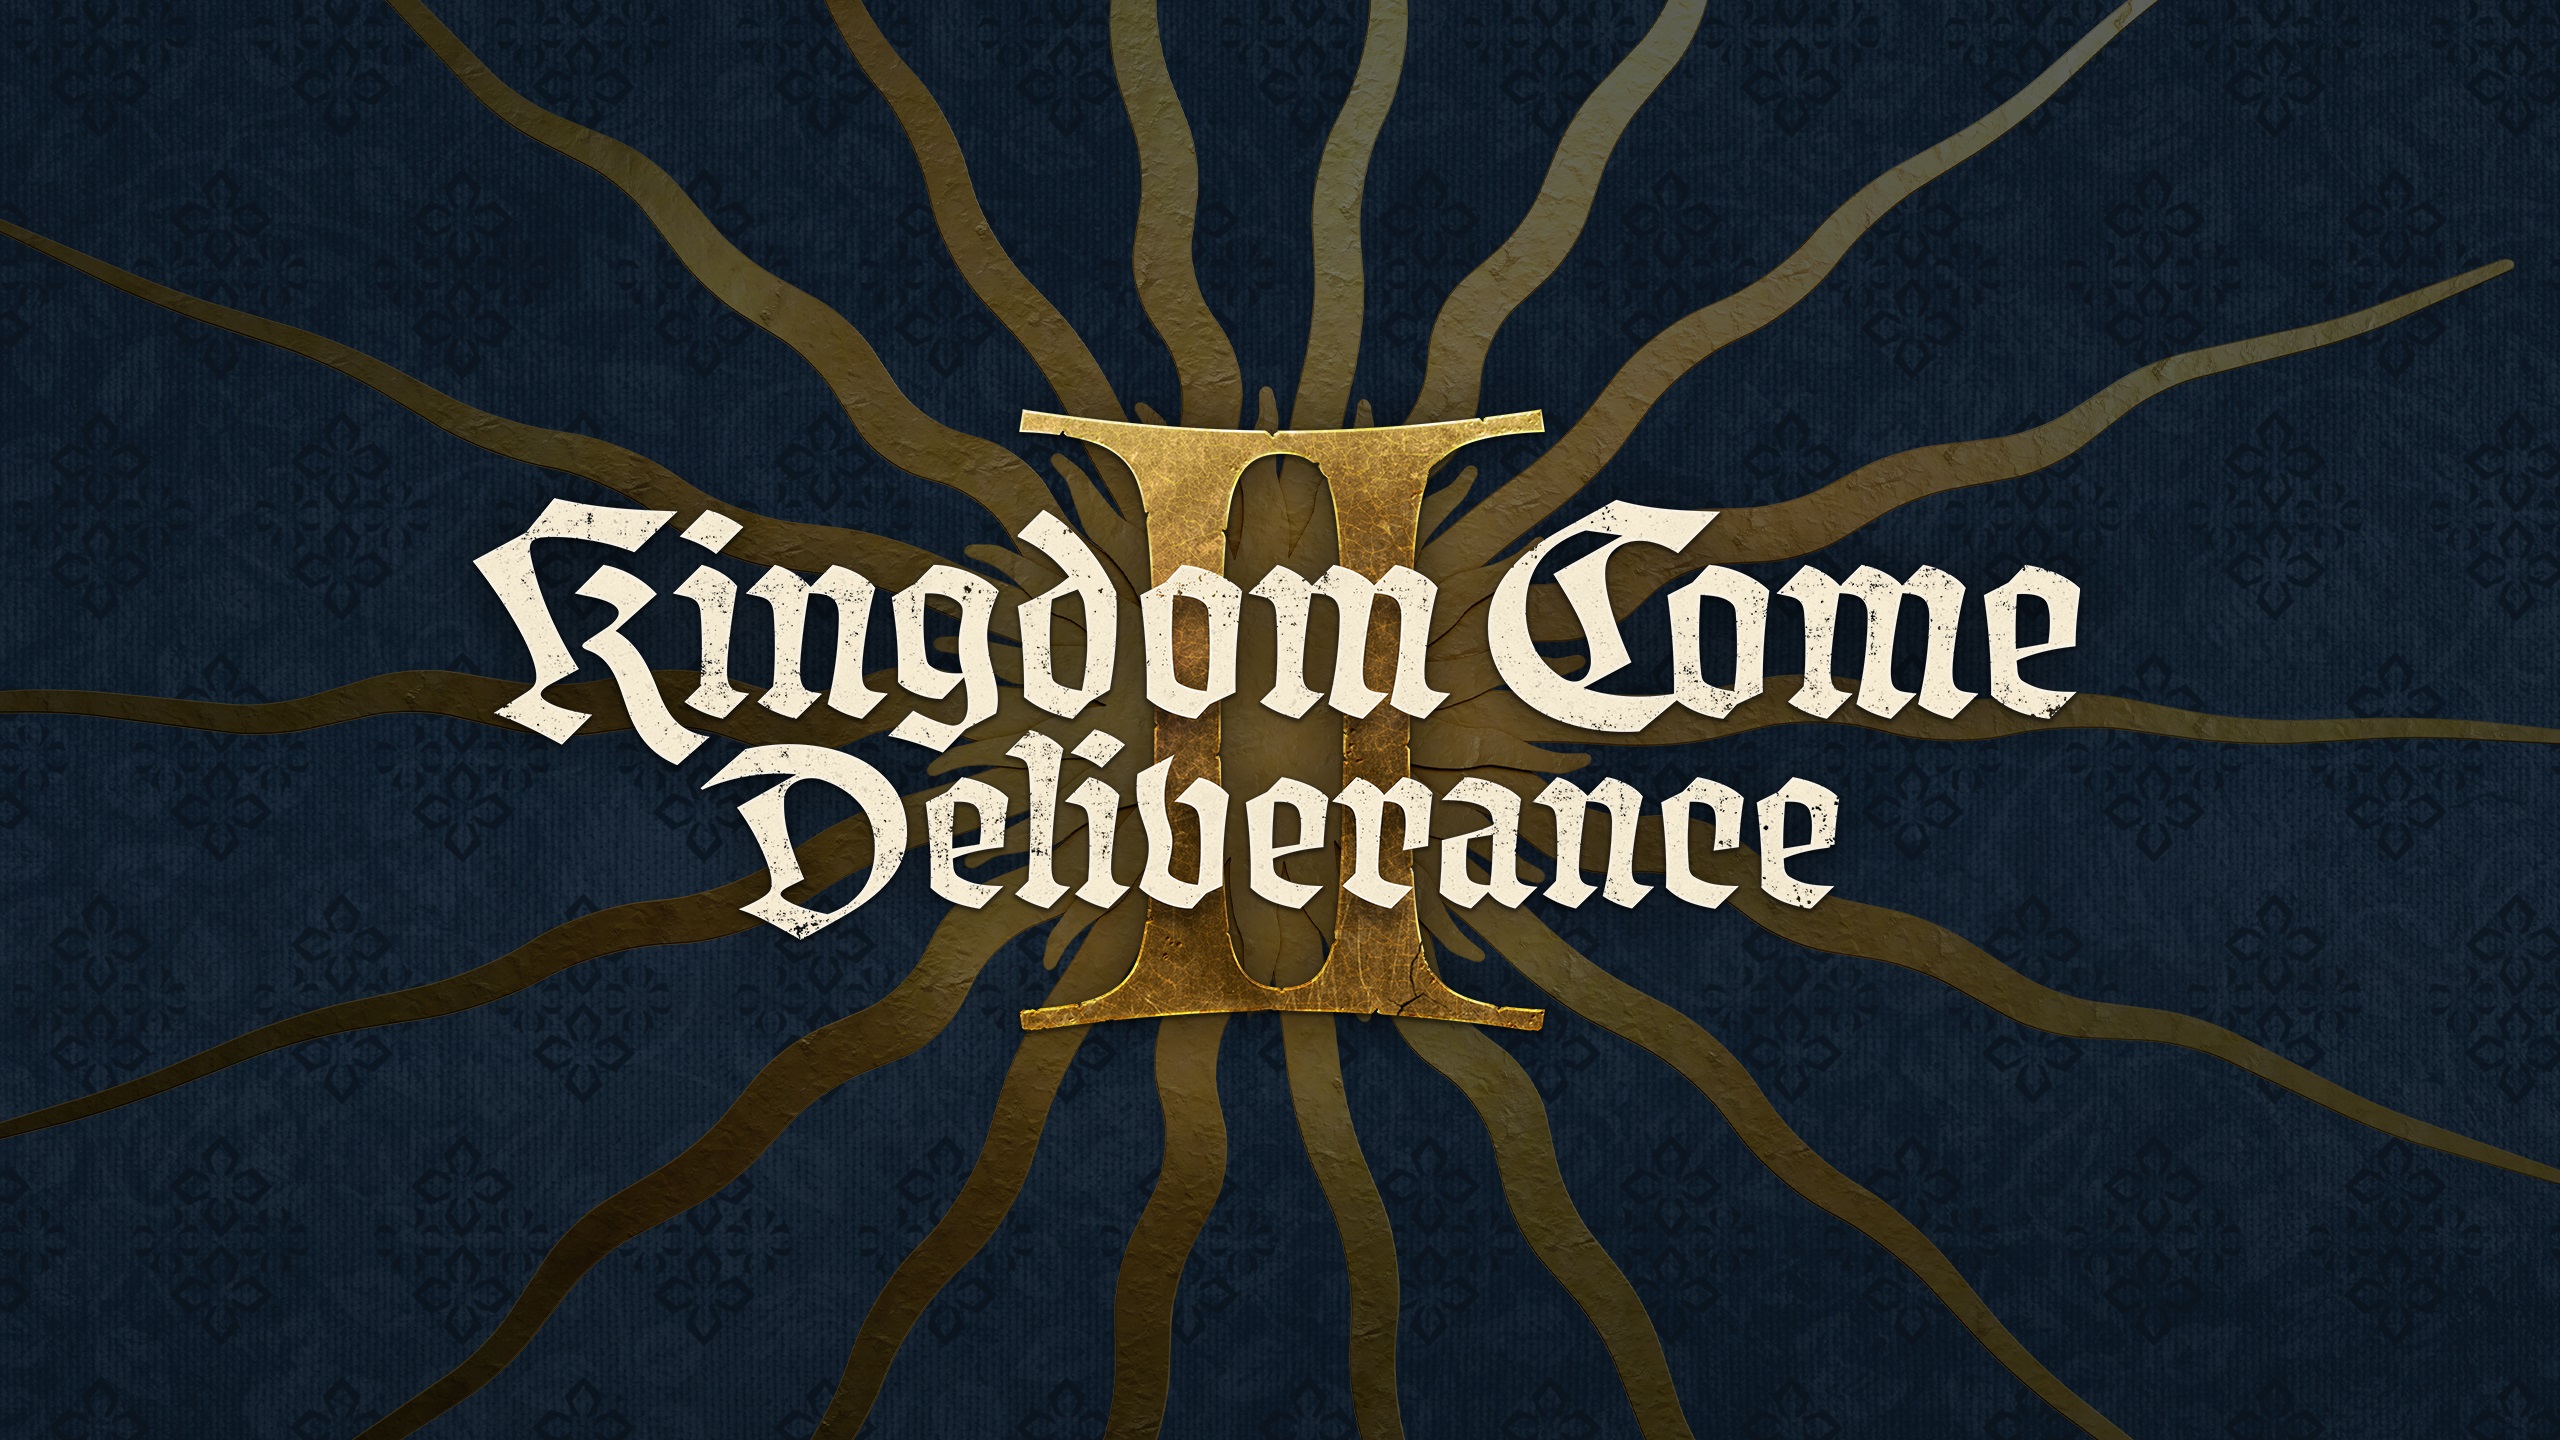 Kingdom Come: Deliverance 2 Set to Bring Action This Year